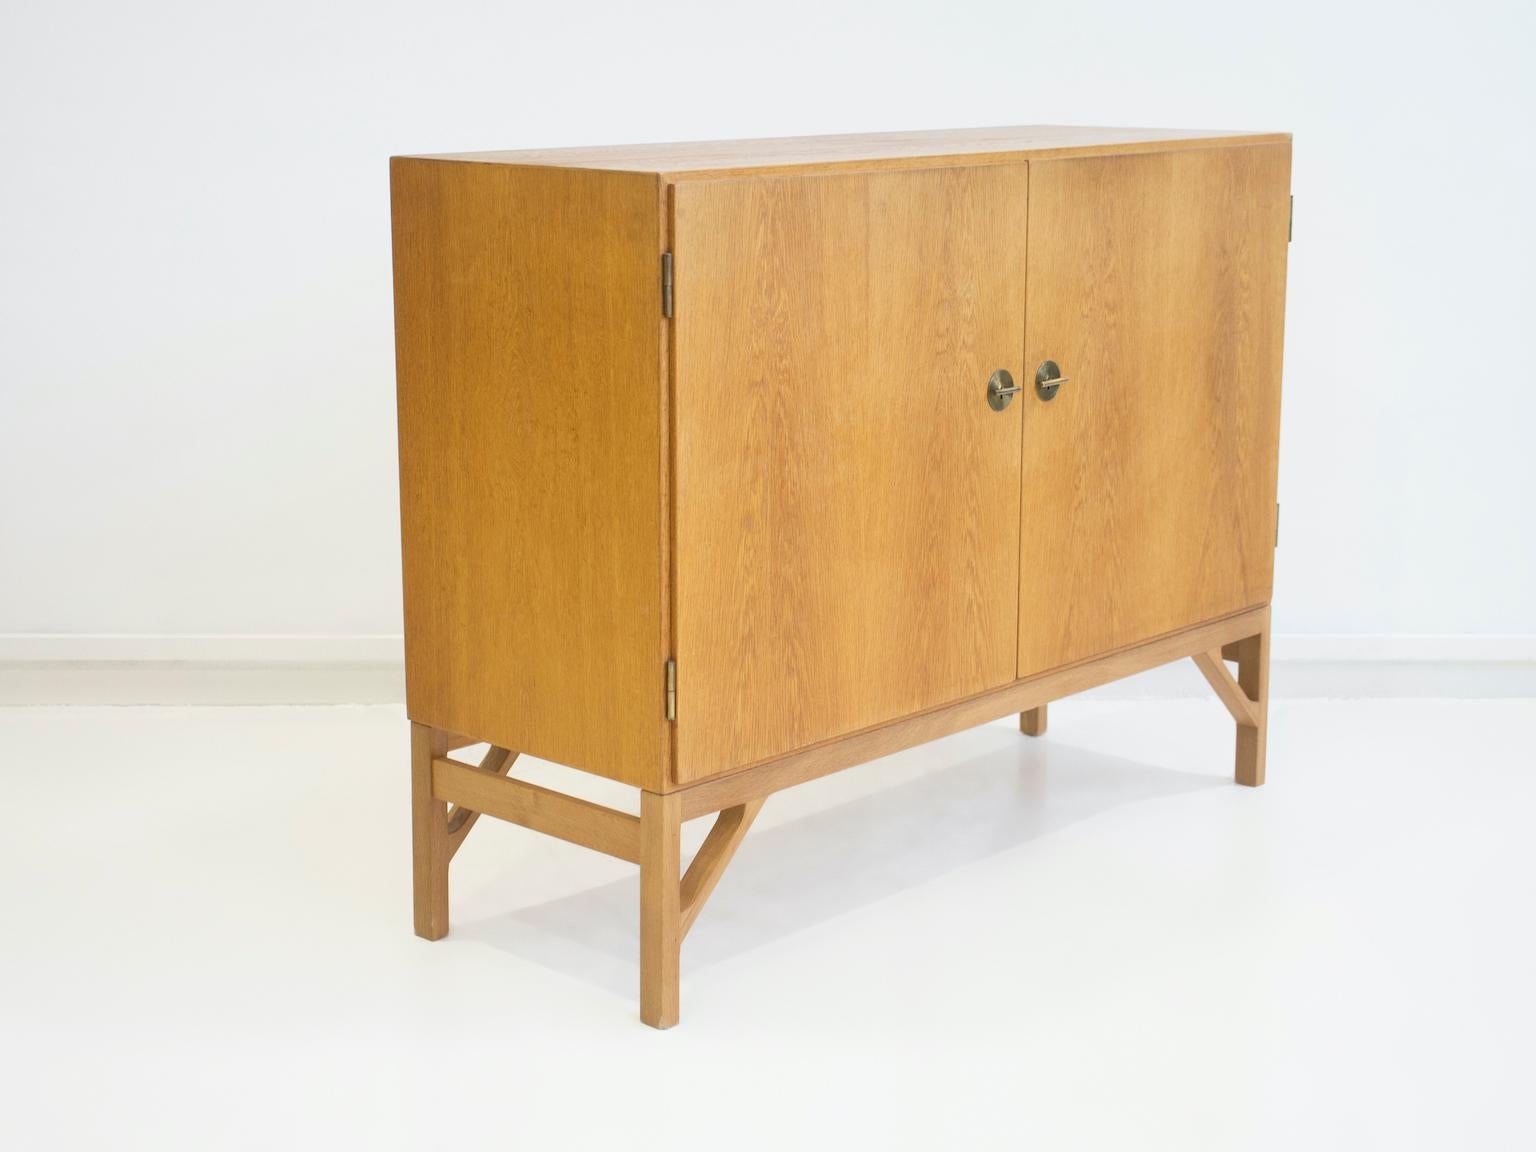 Oak sideboard with two doors, behind which are six drawers. Handles made of brass with two keys included. Designed by Børge Mogensen and manufactured by C. M. Madsen for FDB, model 232. 
Literature: FDB furniture catalog 1954.